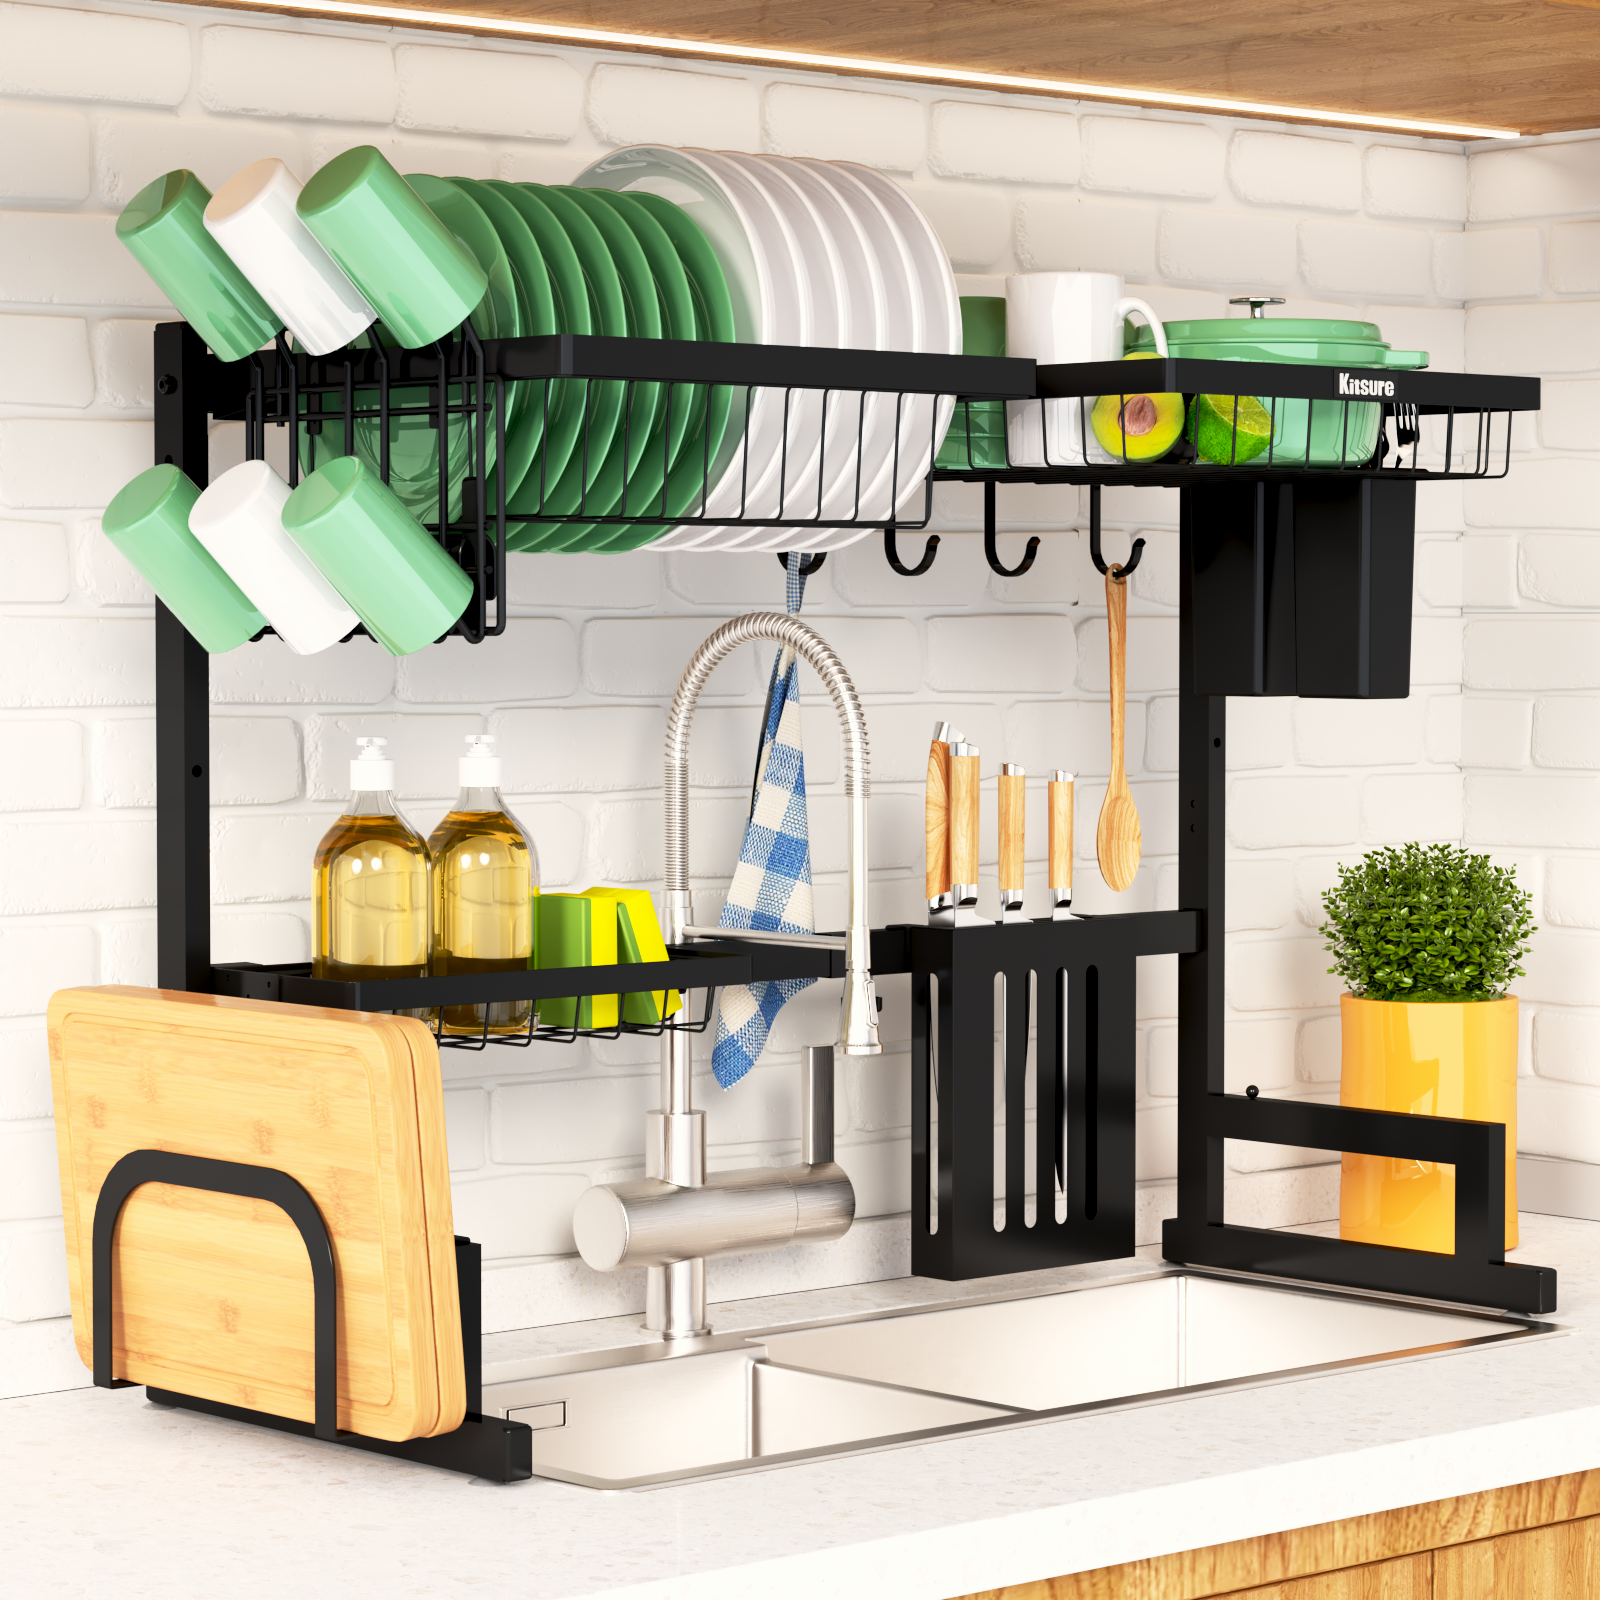 Over-The-Sink Dish Drying Rack